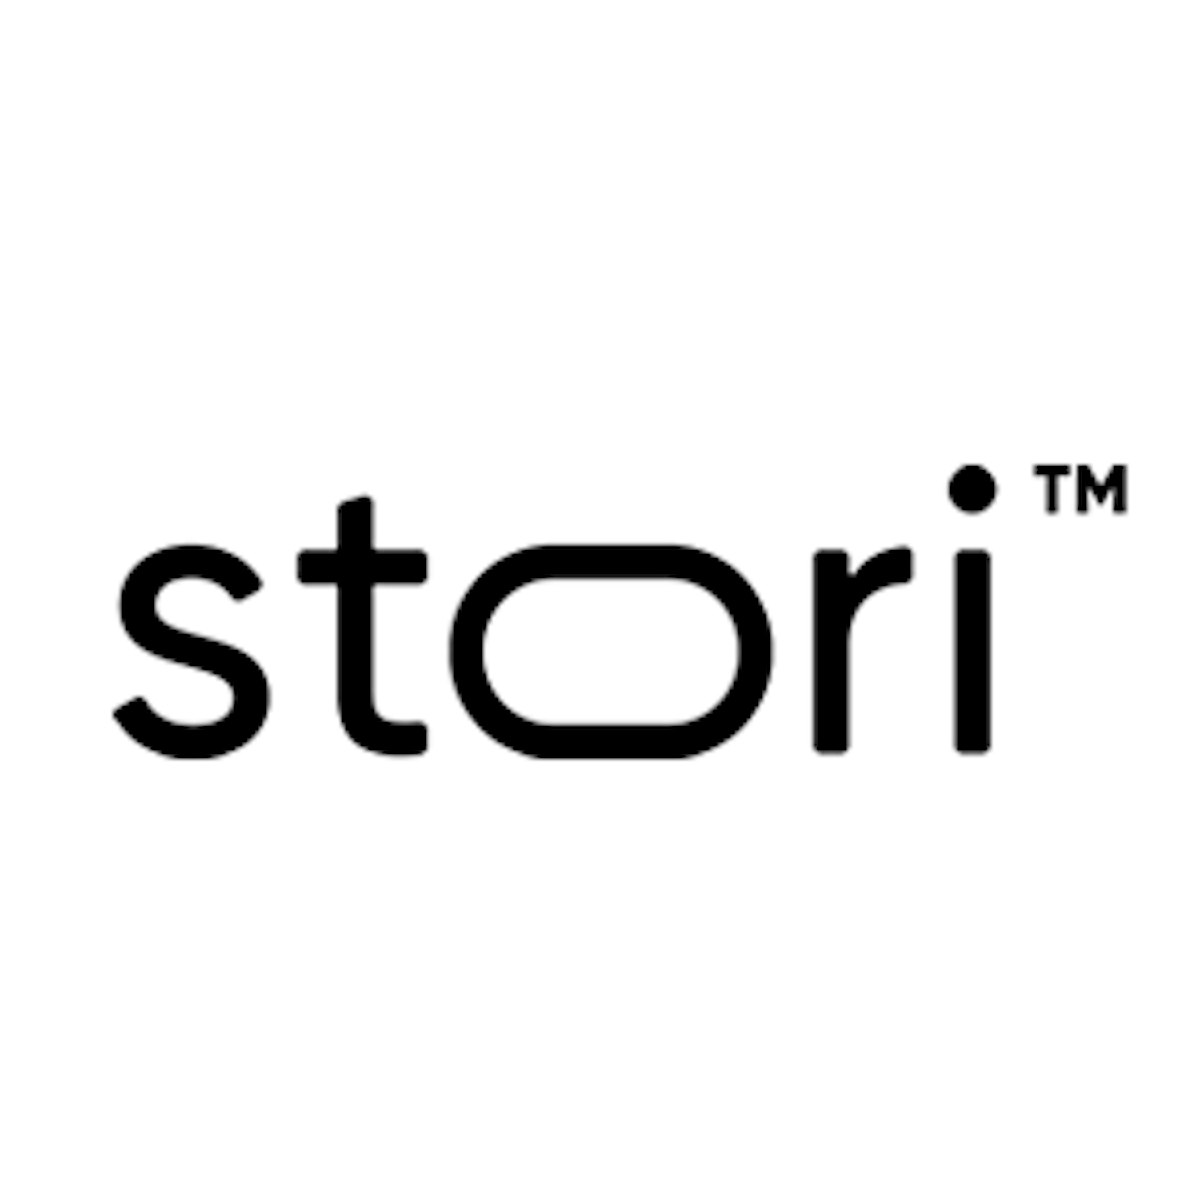 Stori cannabis storage solution: The modern way to store and track